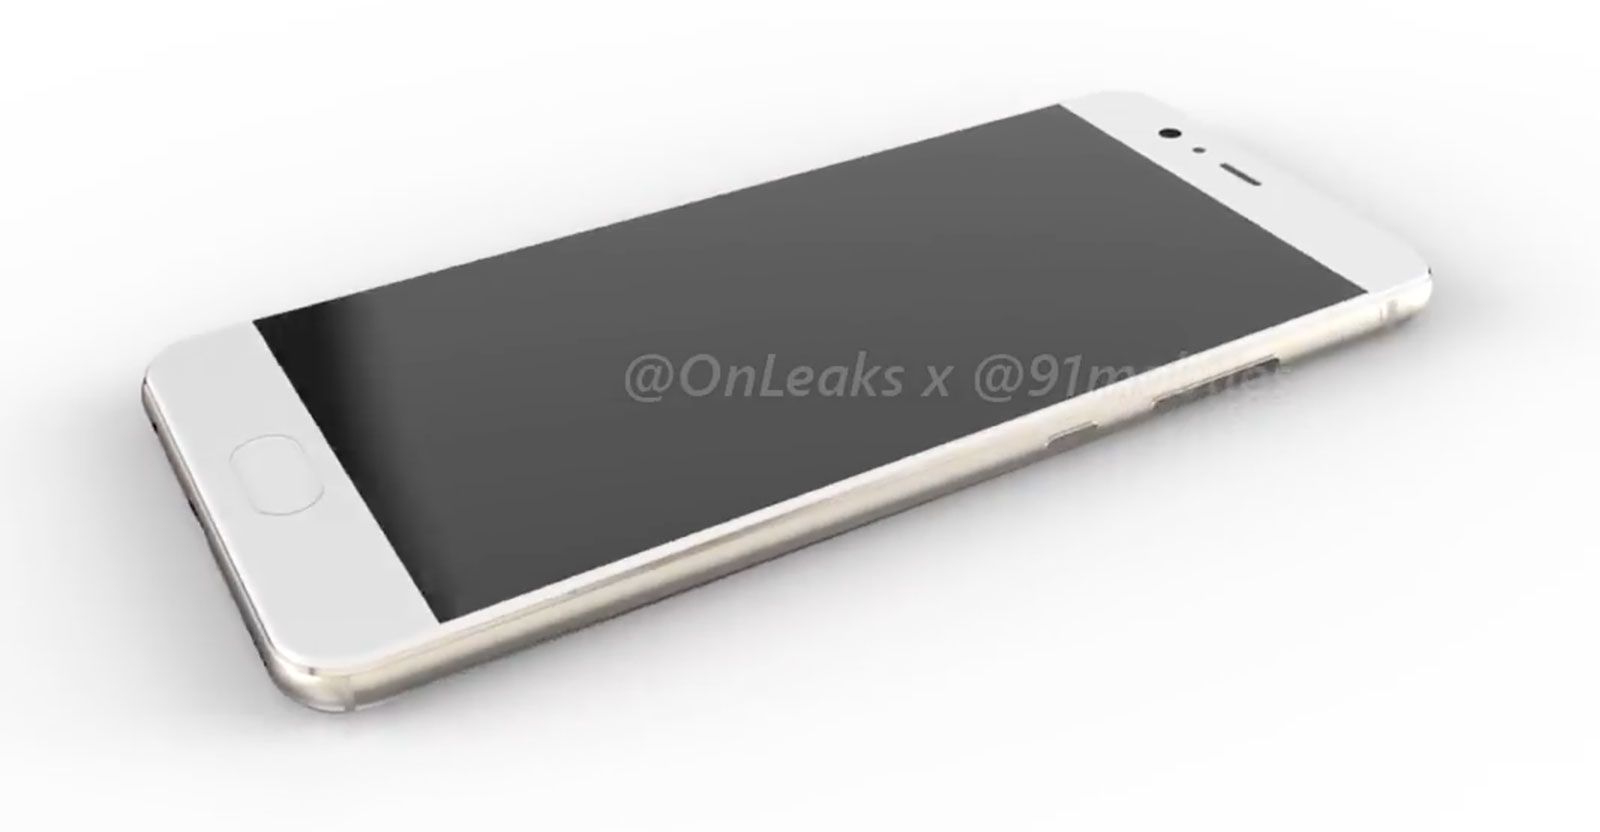 huawei p10 video render shows more rounded edges and front mounted home button image 1